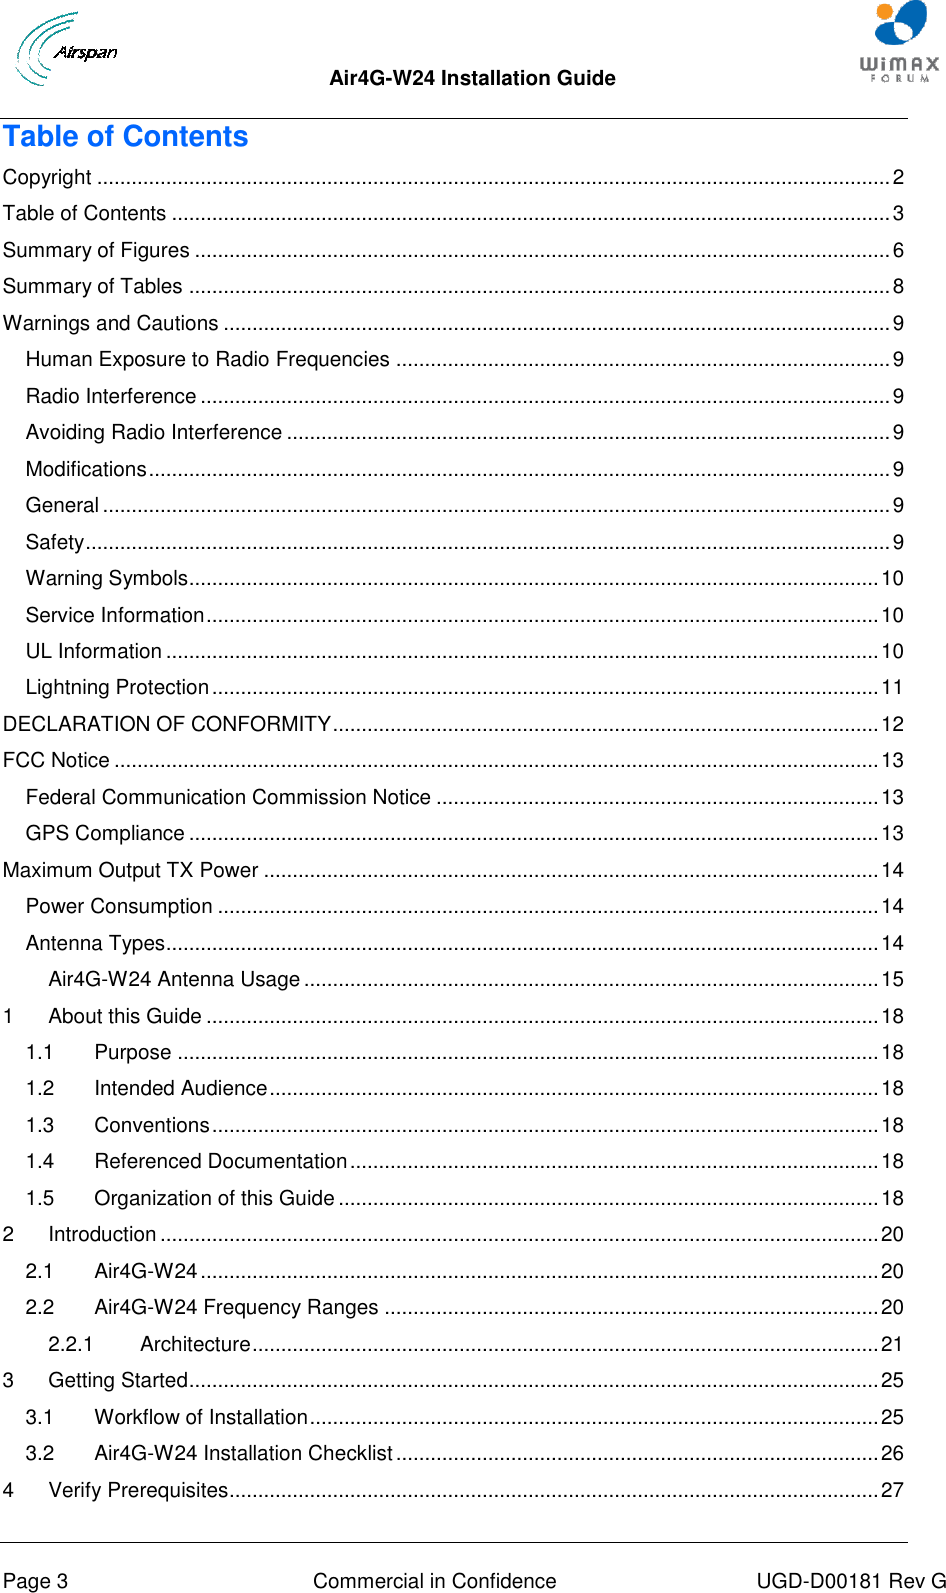  Air4G-W24 Installation Guide       Page 3  Commercial in Confidence  UGD-D00181 Rev G Table of Contents Copyright .......................................................................................................................................... 2 Table of Contents ............................................................................................................................. 3 Summary of Figures ......................................................................................................................... 6 Summary of Tables .......................................................................................................................... 8 Warnings and Cautions .................................................................................................................... 9 Human Exposure to Radio Frequencies ...................................................................................... 9 Radio Interference ........................................................................................................................ 9 Avoiding Radio Interference ......................................................................................................... 9 Modifications ................................................................................................................................. 9 General ......................................................................................................................................... 9 Safety ............................................................................................................................................ 9 Warning Symbols........................................................................................................................ 10 Service Information ..................................................................................................................... 10 UL Information ............................................................................................................................ 10 Lightning Protection .................................................................................................................... 11 DECLARATION OF CONFORMITY ............................................................................................... 12 FCC Notice ..................................................................................................................................... 13 Federal Communication Commission Notice ............................................................................. 13 GPS Compliance ........................................................................................................................ 13 Maximum Output TX Power ........................................................................................................... 14 Power Consumption ................................................................................................................... 14 Antenna Types............................................................................................................................ 14 Air4G-W24 Antenna Usage .................................................................................................... 15 1 About this Guide ..................................................................................................................... 18 1.1 Purpose .......................................................................................................................... 18 1.2 Intended Audience .......................................................................................................... 18 1.3 Conventions .................................................................................................................... 18 1.4 Referenced Documentation ............................................................................................ 18 1.5 Organization of this Guide .............................................................................................. 18 2 Introduction ............................................................................................................................. 20 2.1 Air4G-W24 ...................................................................................................................... 20 2.2 Air4G-W24 Frequency Ranges ...................................................................................... 20 2.2.1 Architecture ............................................................................................................. 21 3 Getting Started ........................................................................................................................ 25 3.1 Workflow of Installation ................................................................................................... 25 3.2 Air4G-W24 Installation Checklist .................................................................................... 26 4 Verify Prerequisites................................................................................................................. 27 